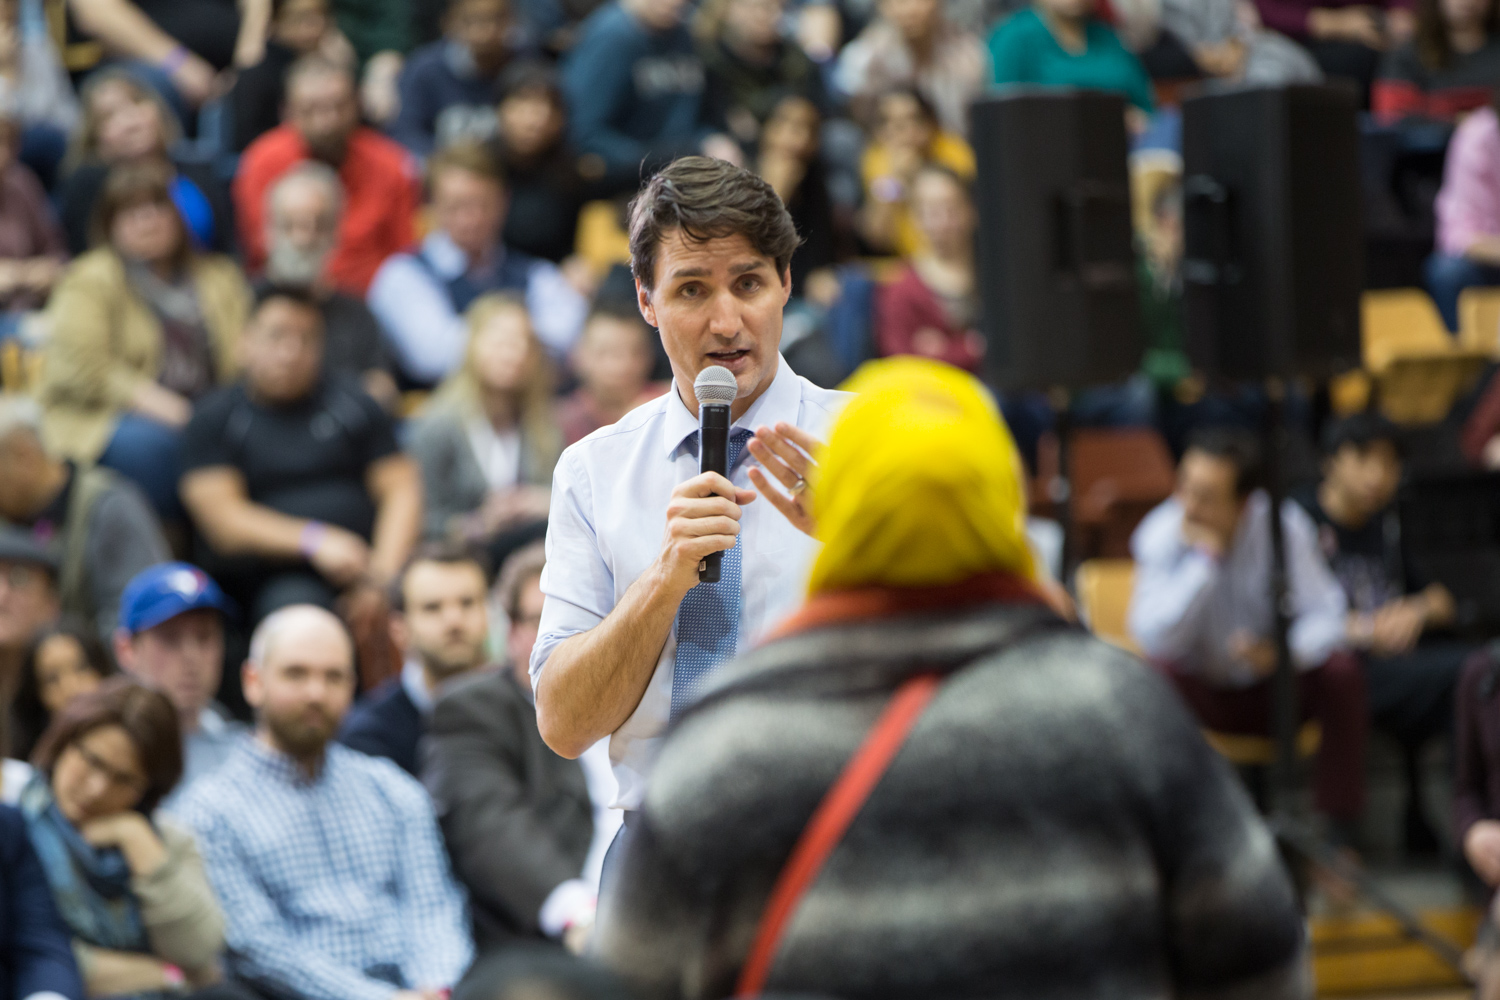 Trudeau responds on Jan. 31, 2018. // Photo from Mike Latschislaw